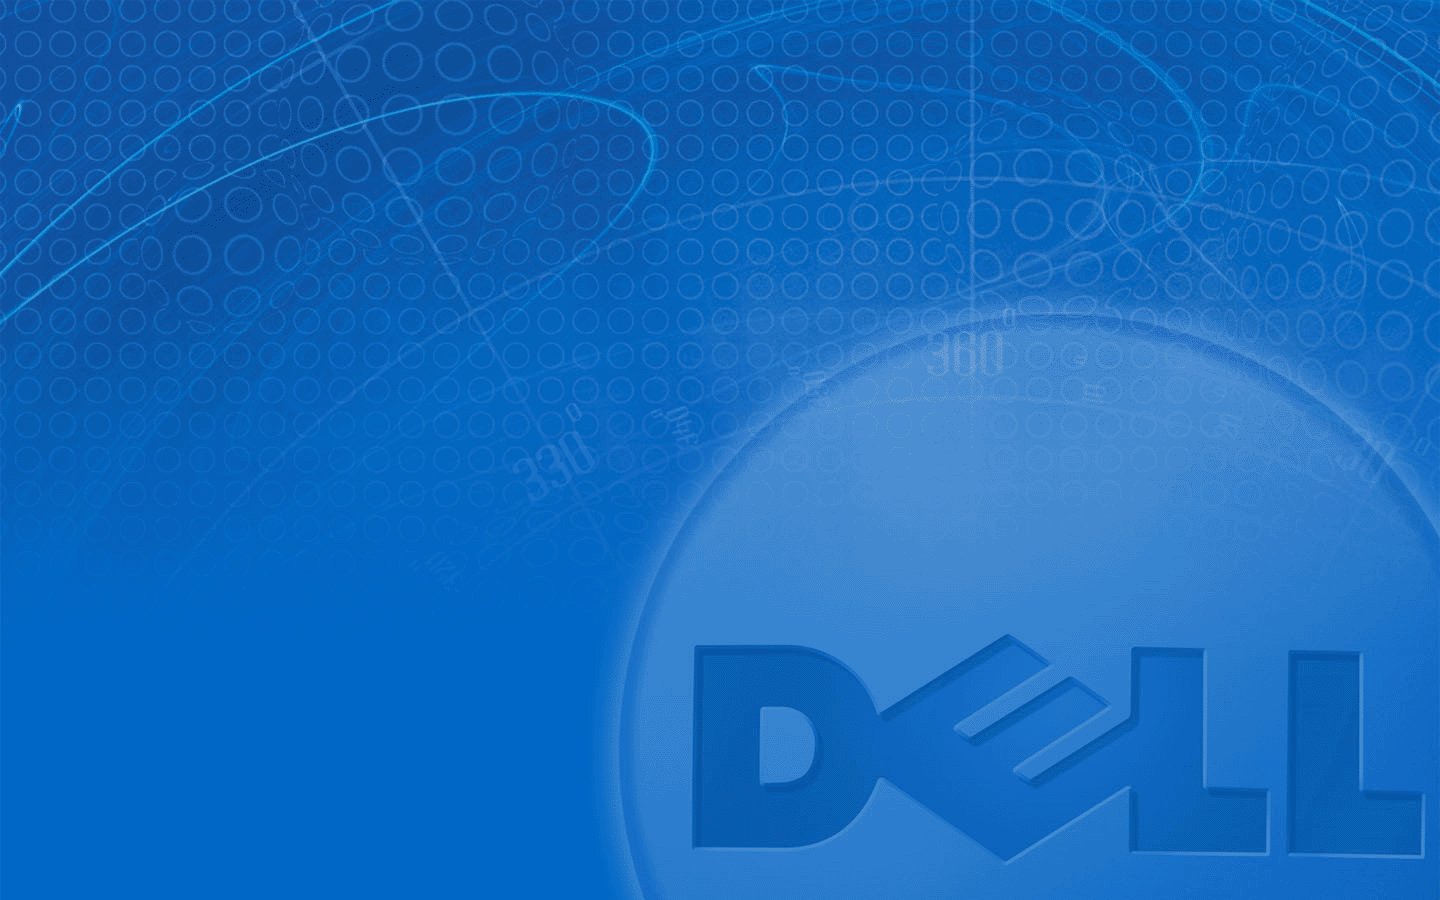 Dell Blue Backgrounds Wallpapers Minimalist